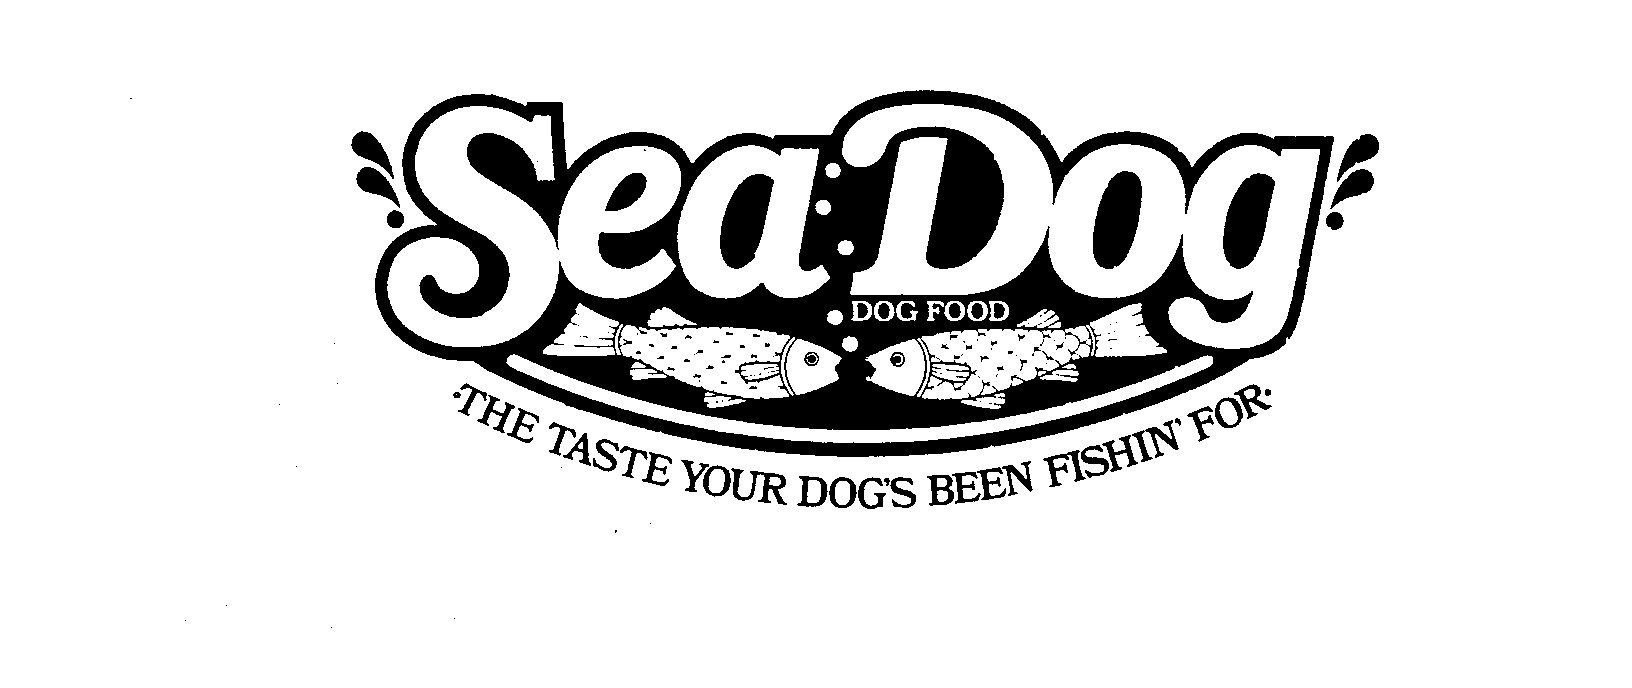  SEA DOG DOG FOOD THE TASTE YOUR DOG'S BEEN FISHIN' FOR